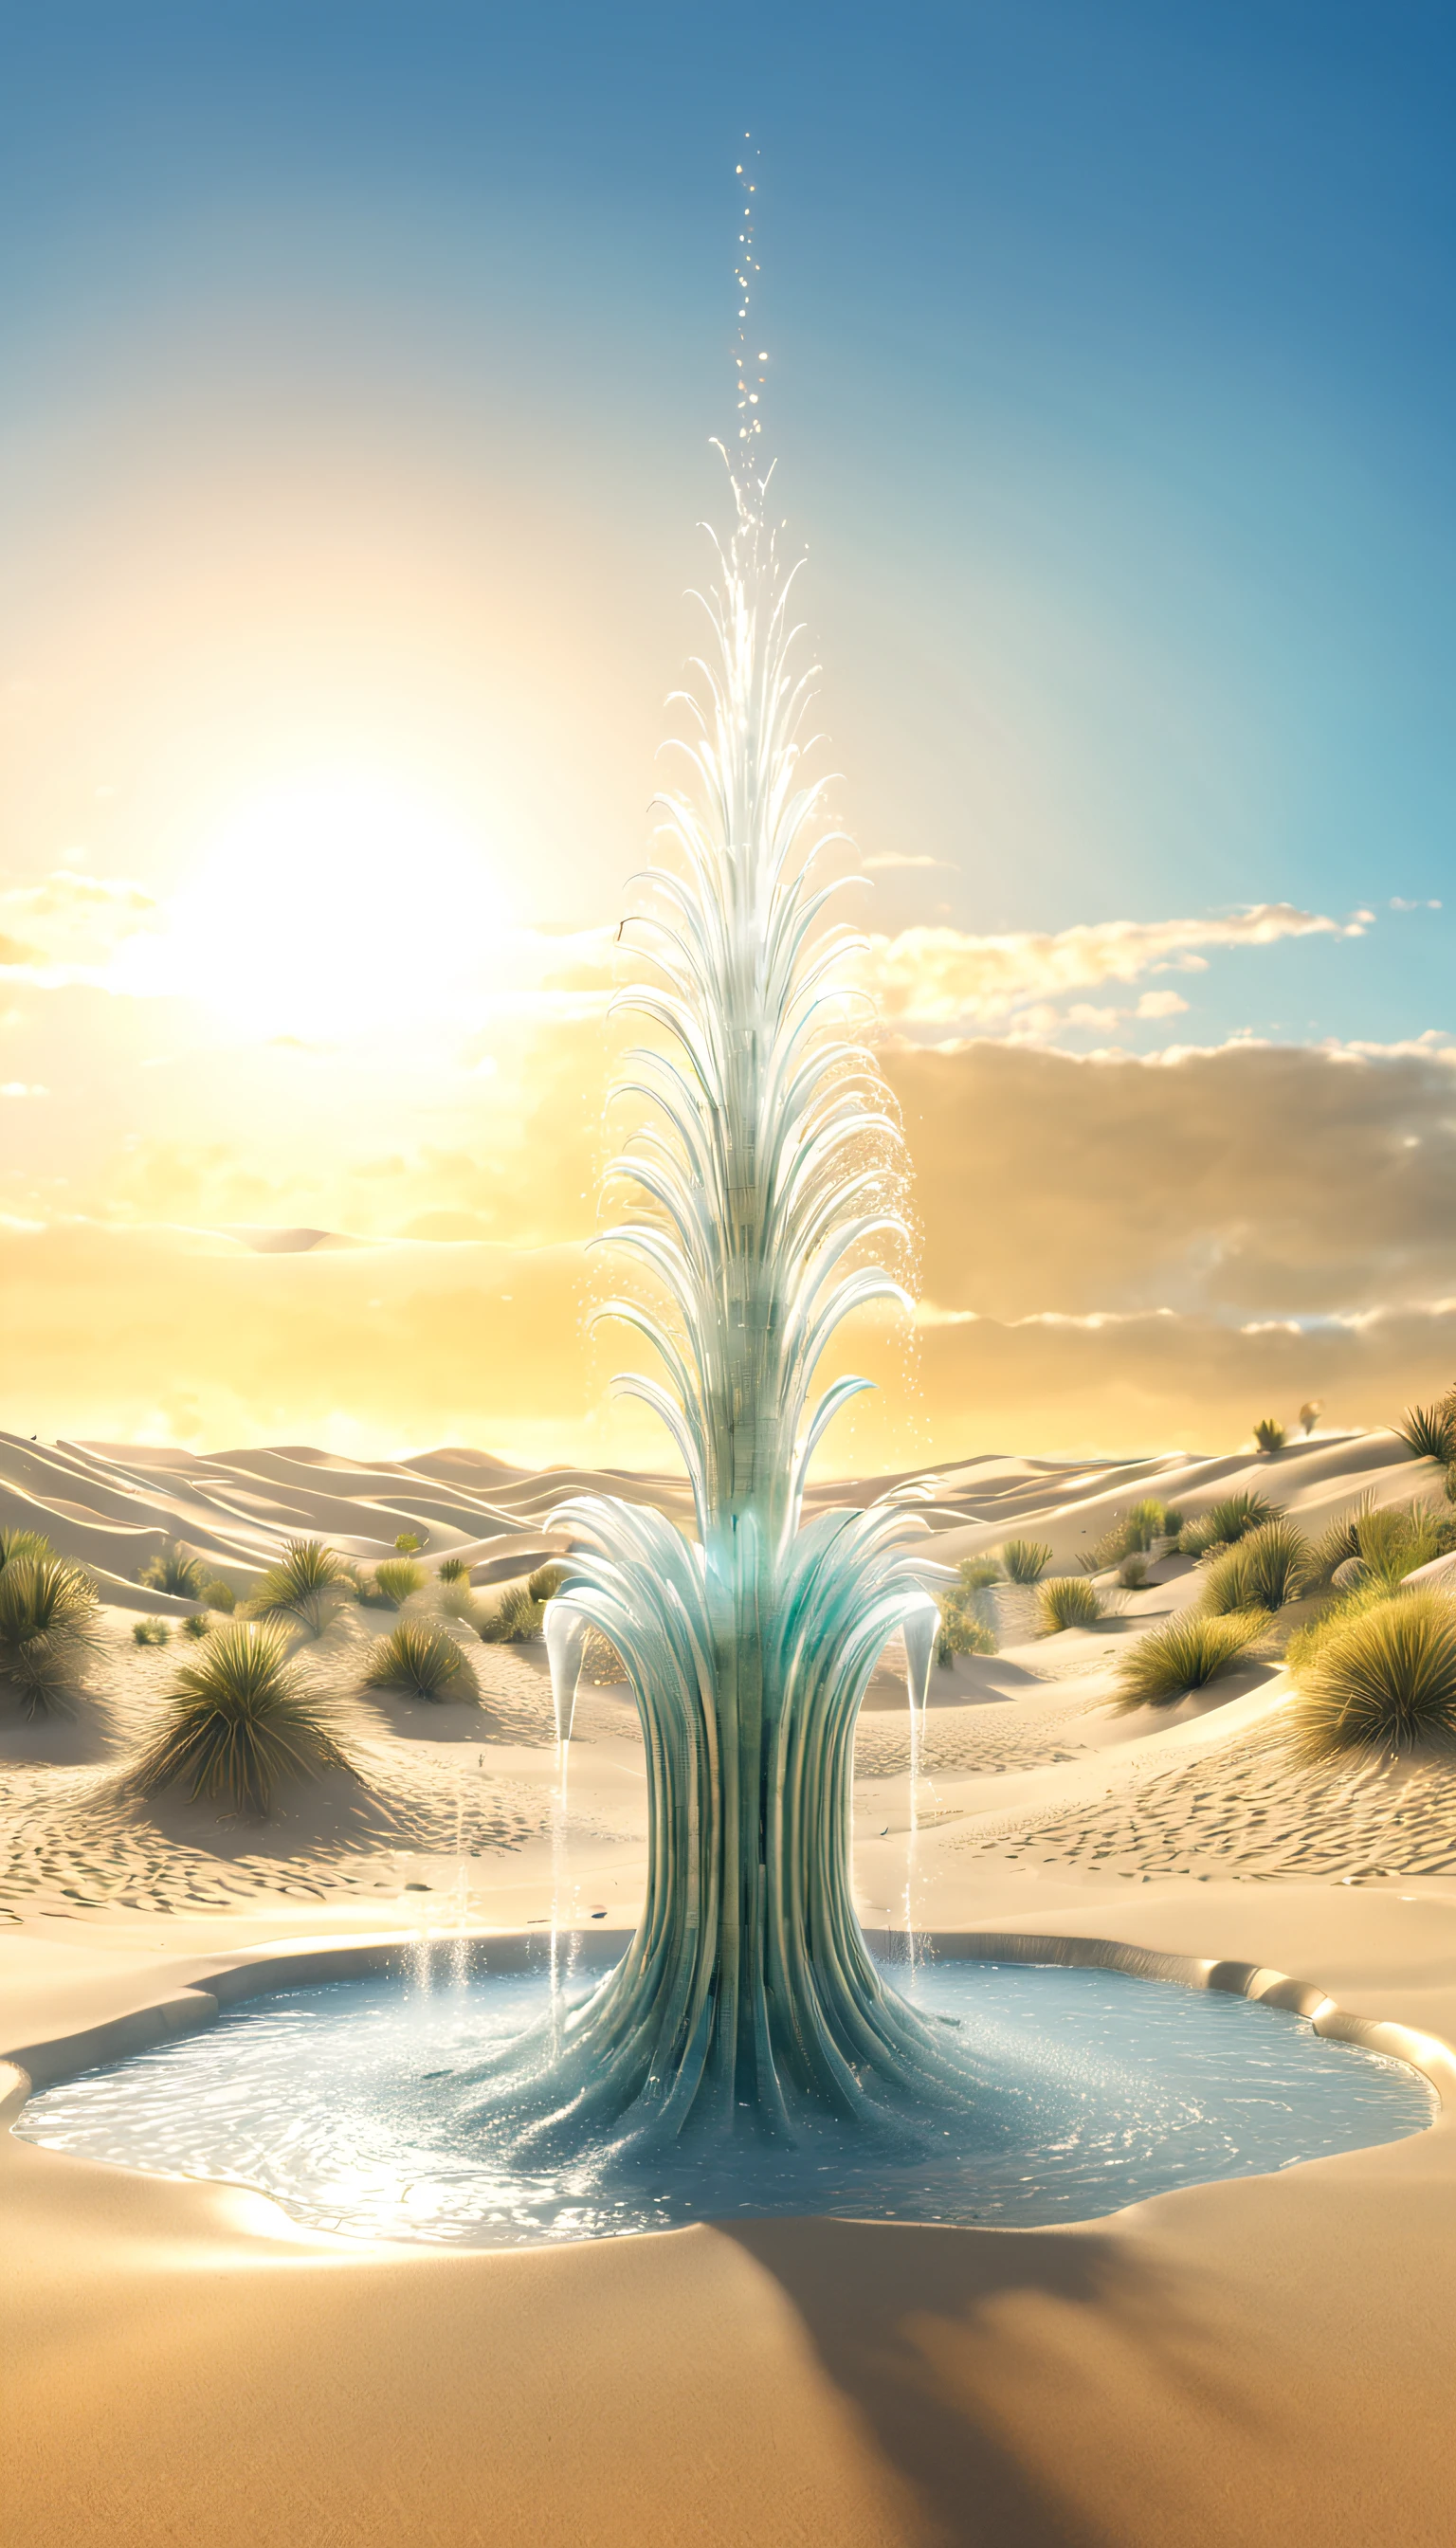 Surreal 3D rendering，Large cybernetic fountain depicted in the dunes, Cactus shaped faucet sprays water, Water-sprayed，Marshlands,Ethereal，Super fantasy ，
Background with：desolate sand dunes，the setting sun，camelstoe，